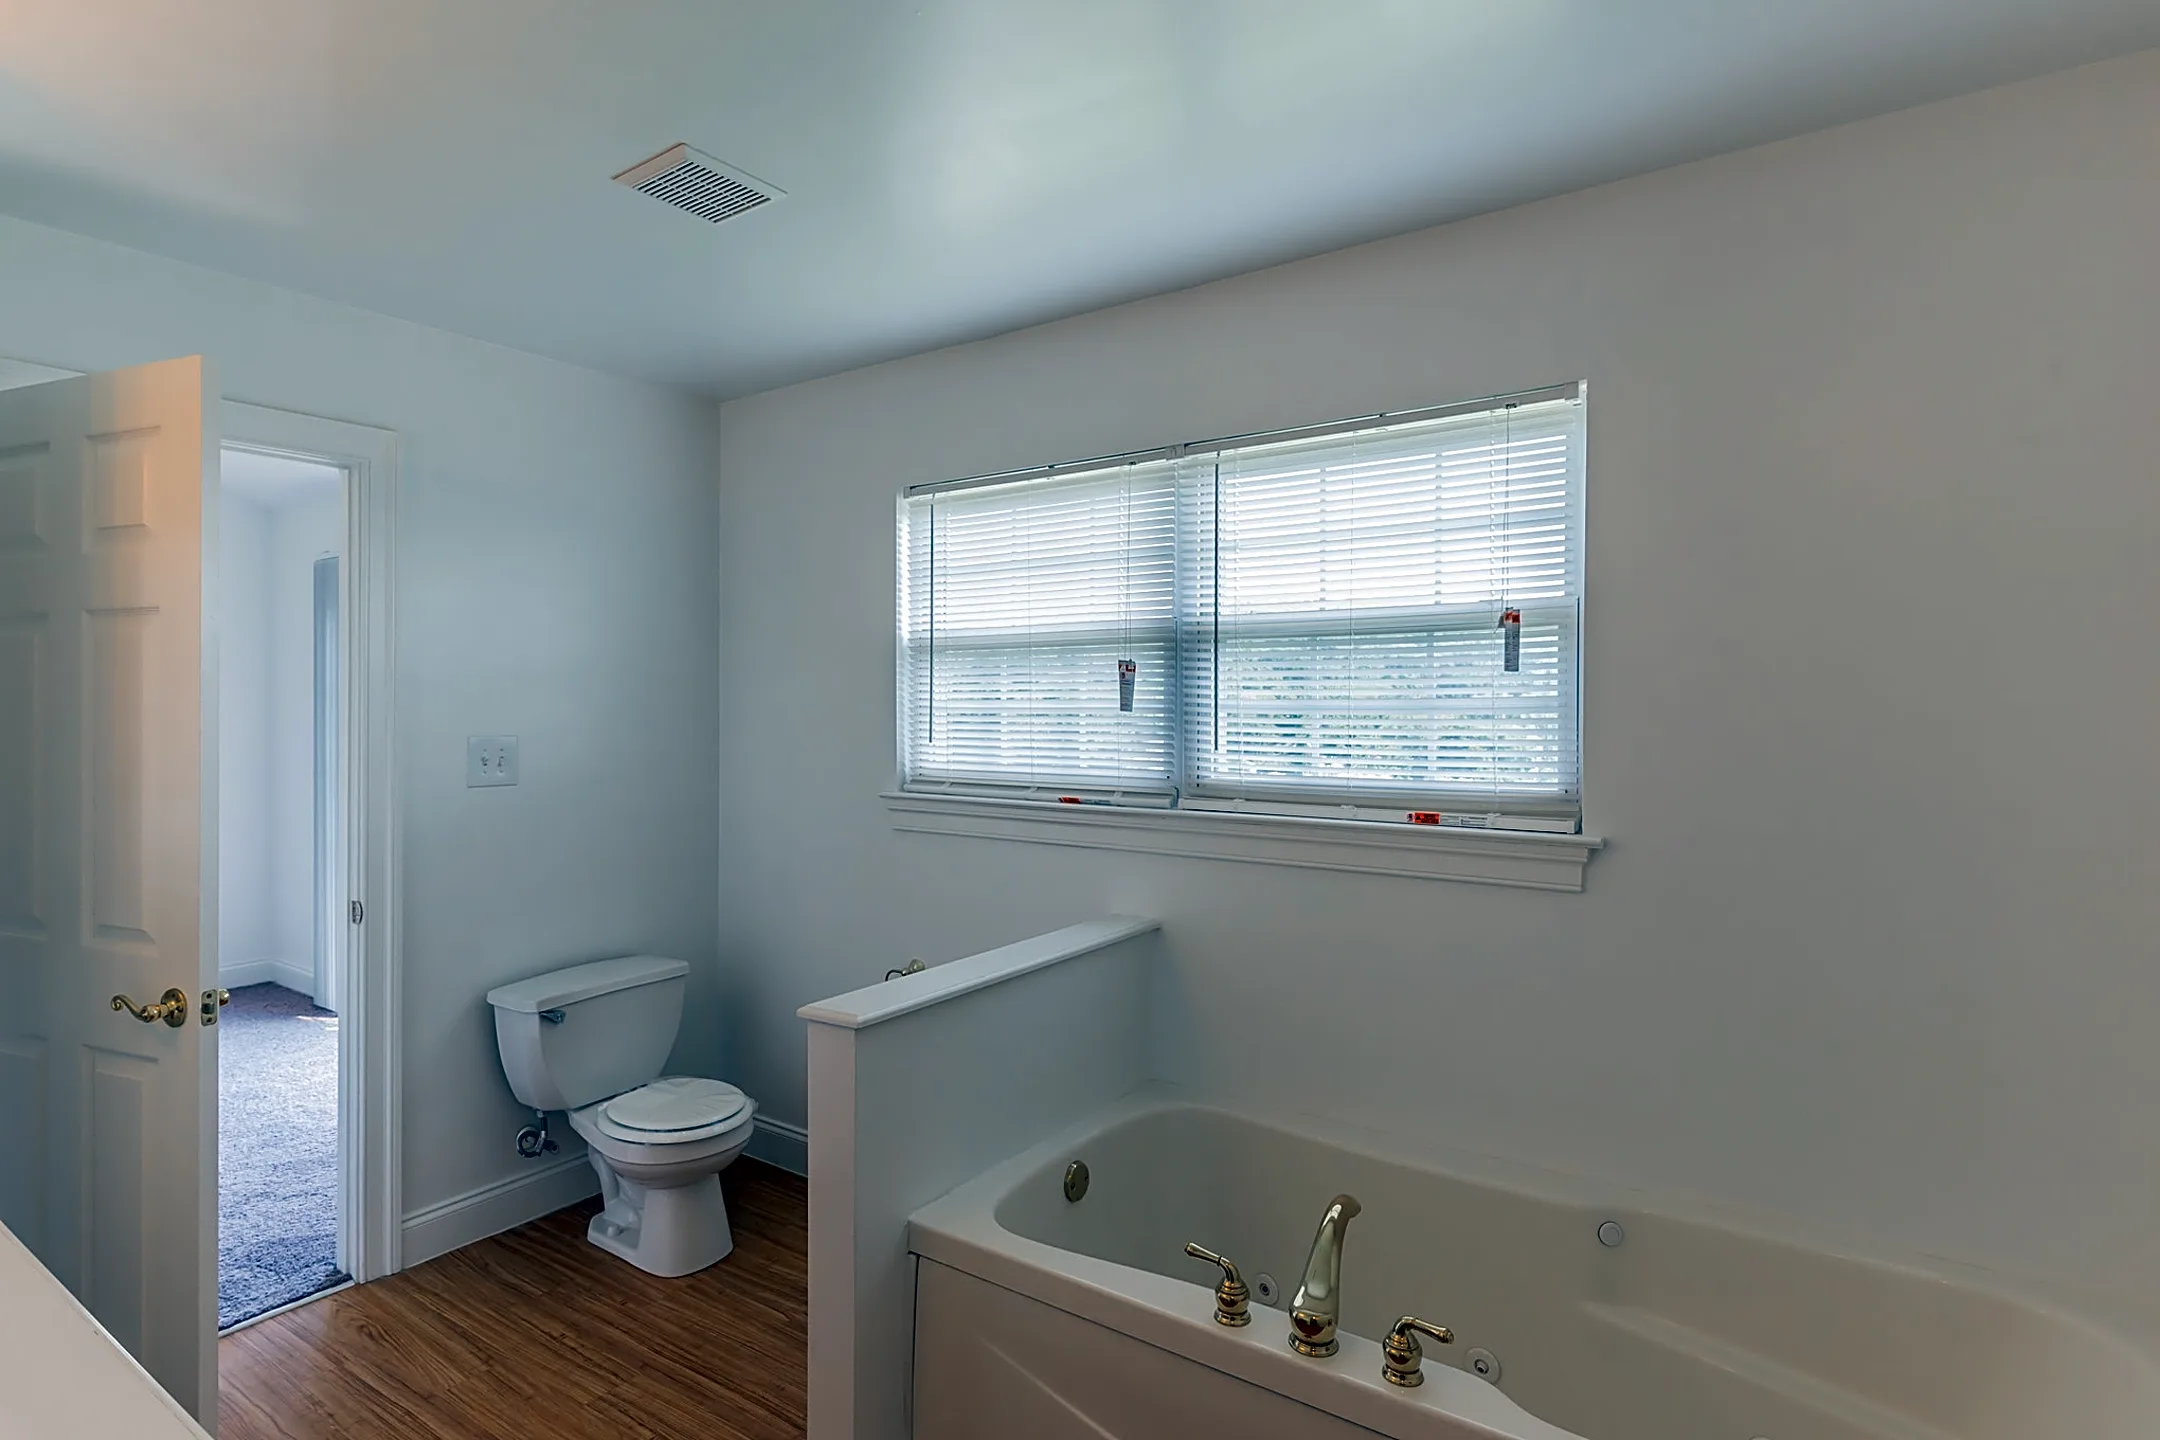 Bathroom - The Fairways Apartments & Townhomes - Thorndale, PA